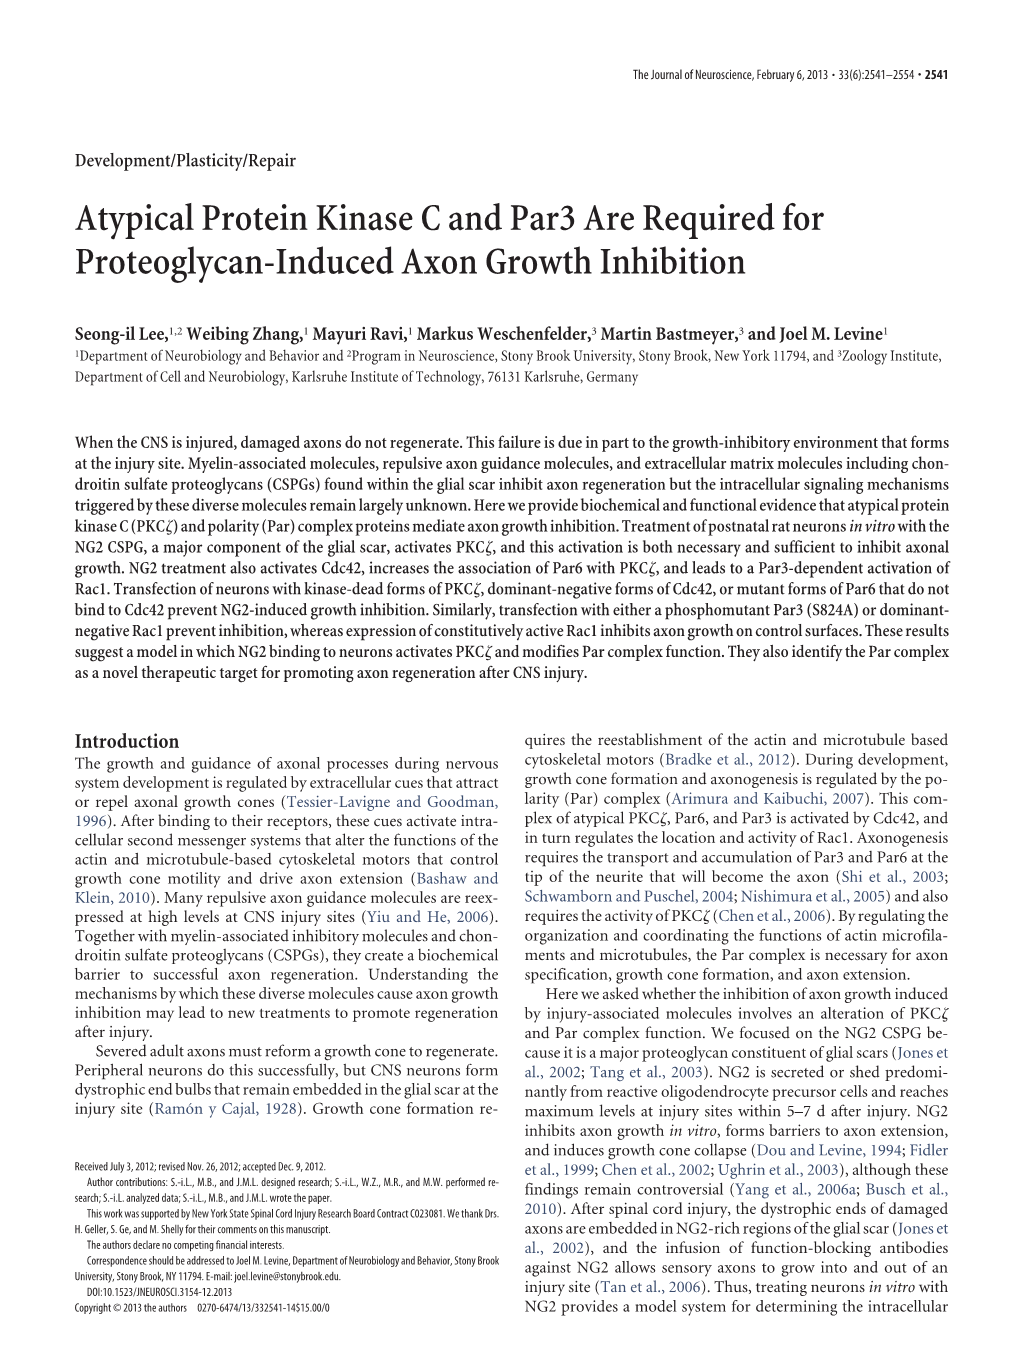 Atypical Protein Kinase C and Par3 Are Required for Proteoglycan-Induced Axon Growth Inhibition